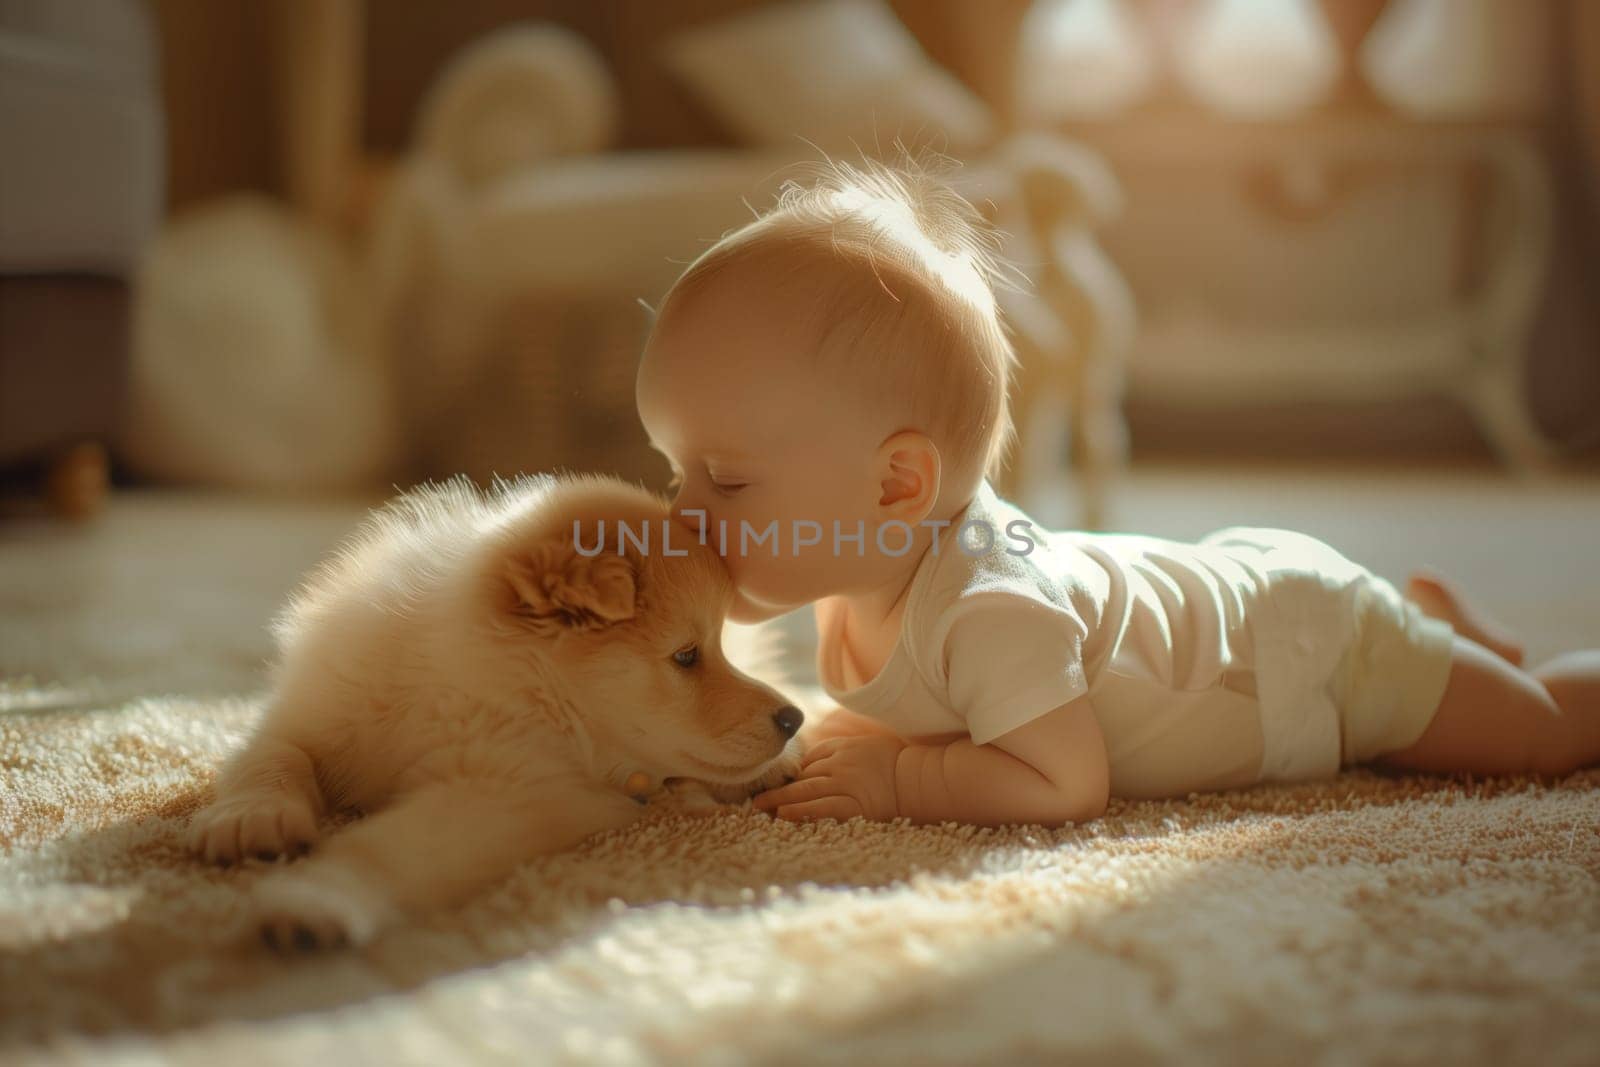 A baby is lying comfortably on the hardwood floor with a puppy, their companion dog. The toddler looks happy and content in their baby toddler clothing